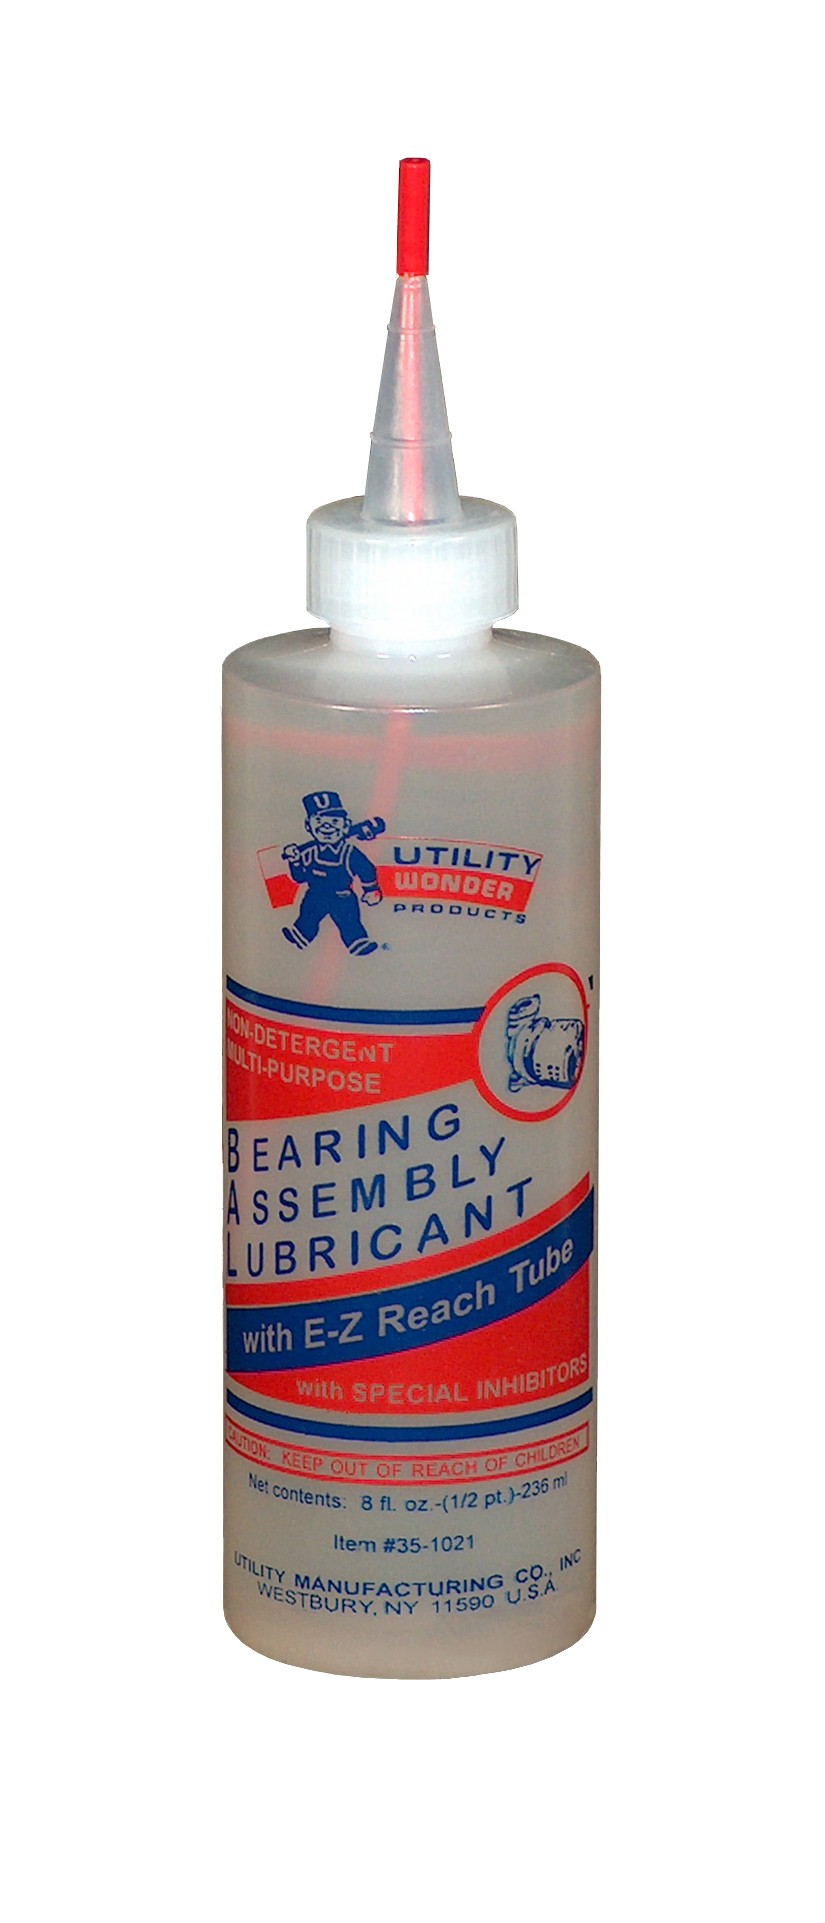 BEARING ASSEMBLY LUBRICANT